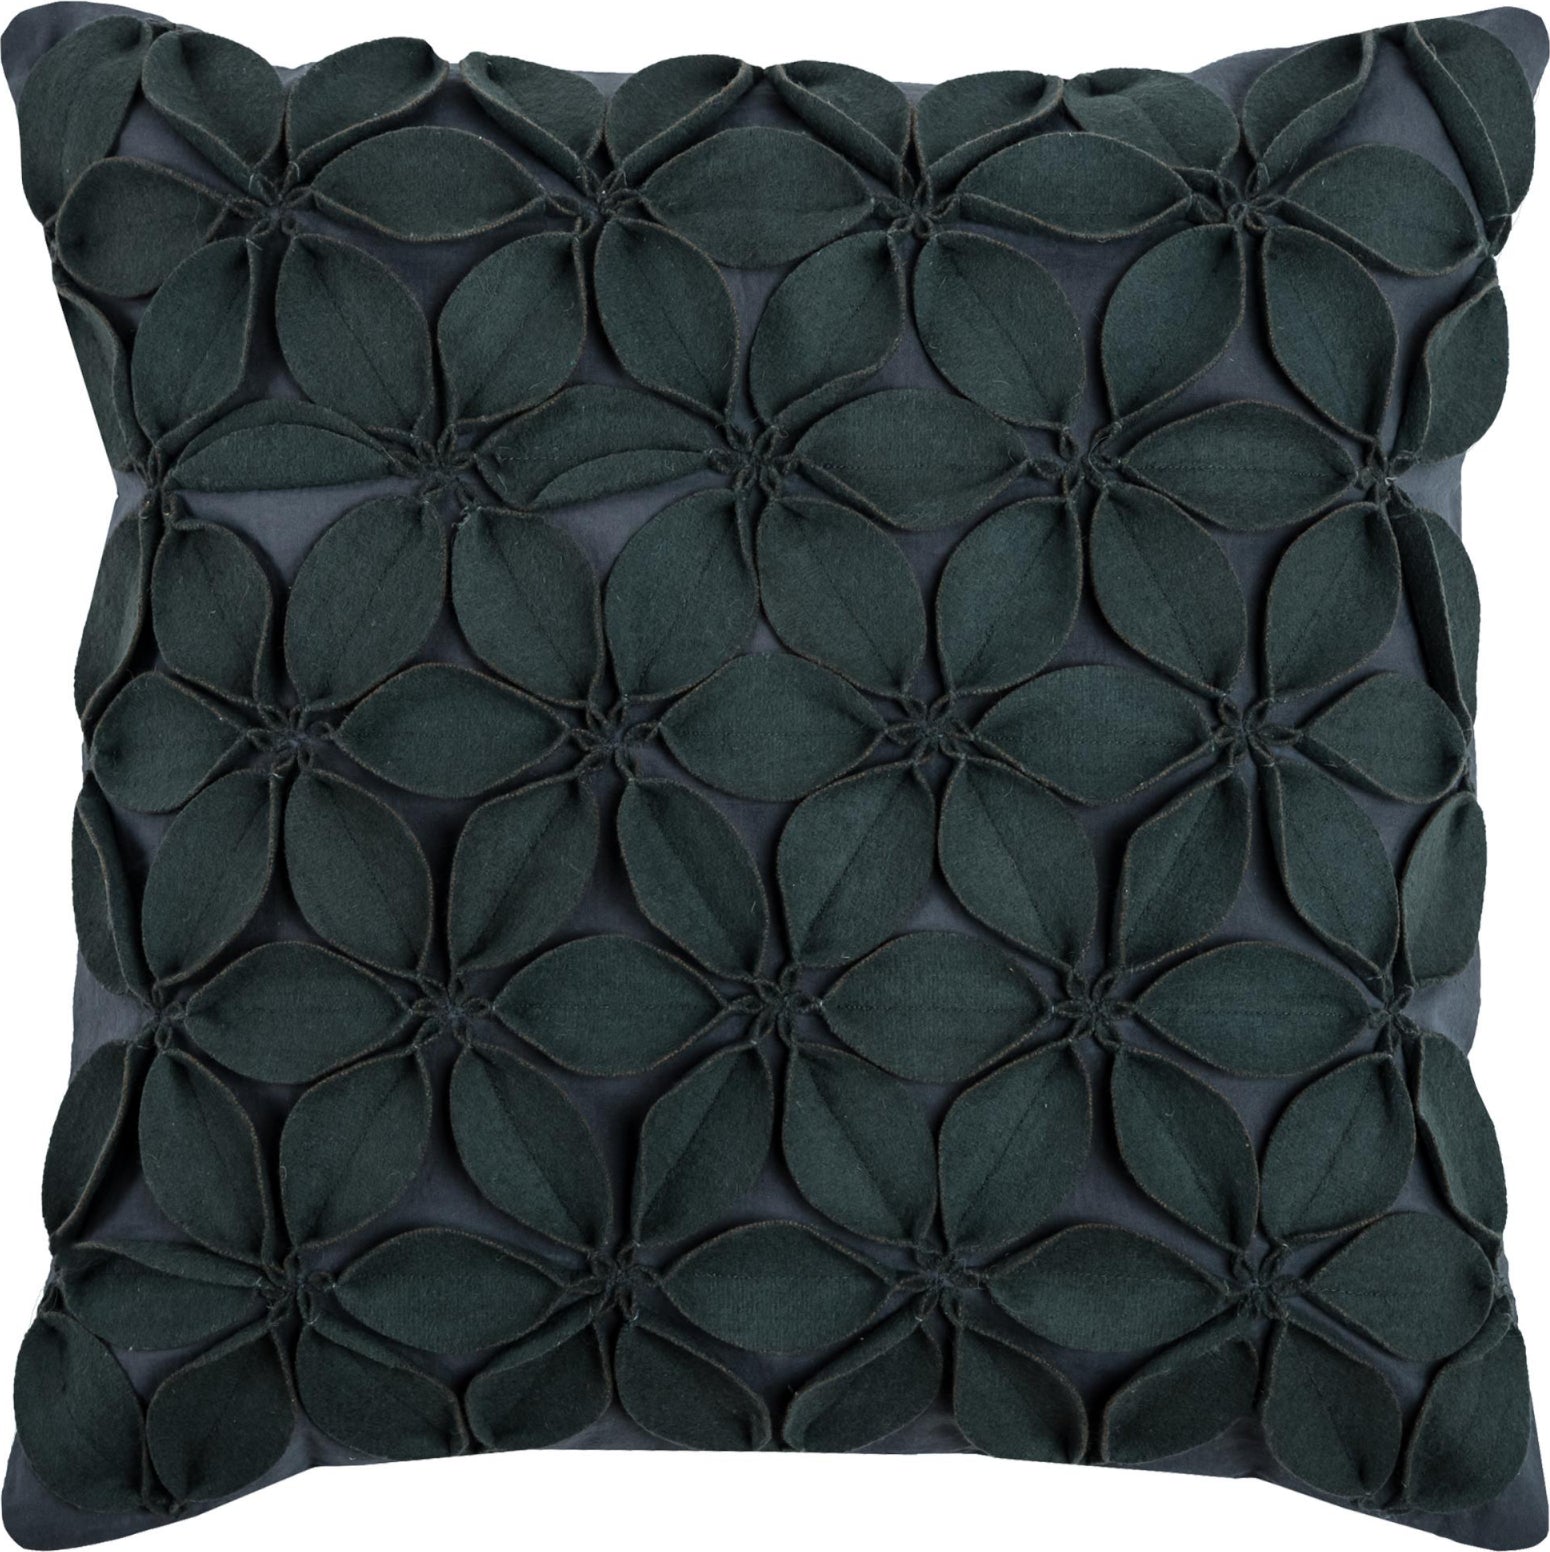 Rizzy Pillows T08537 Charcoal